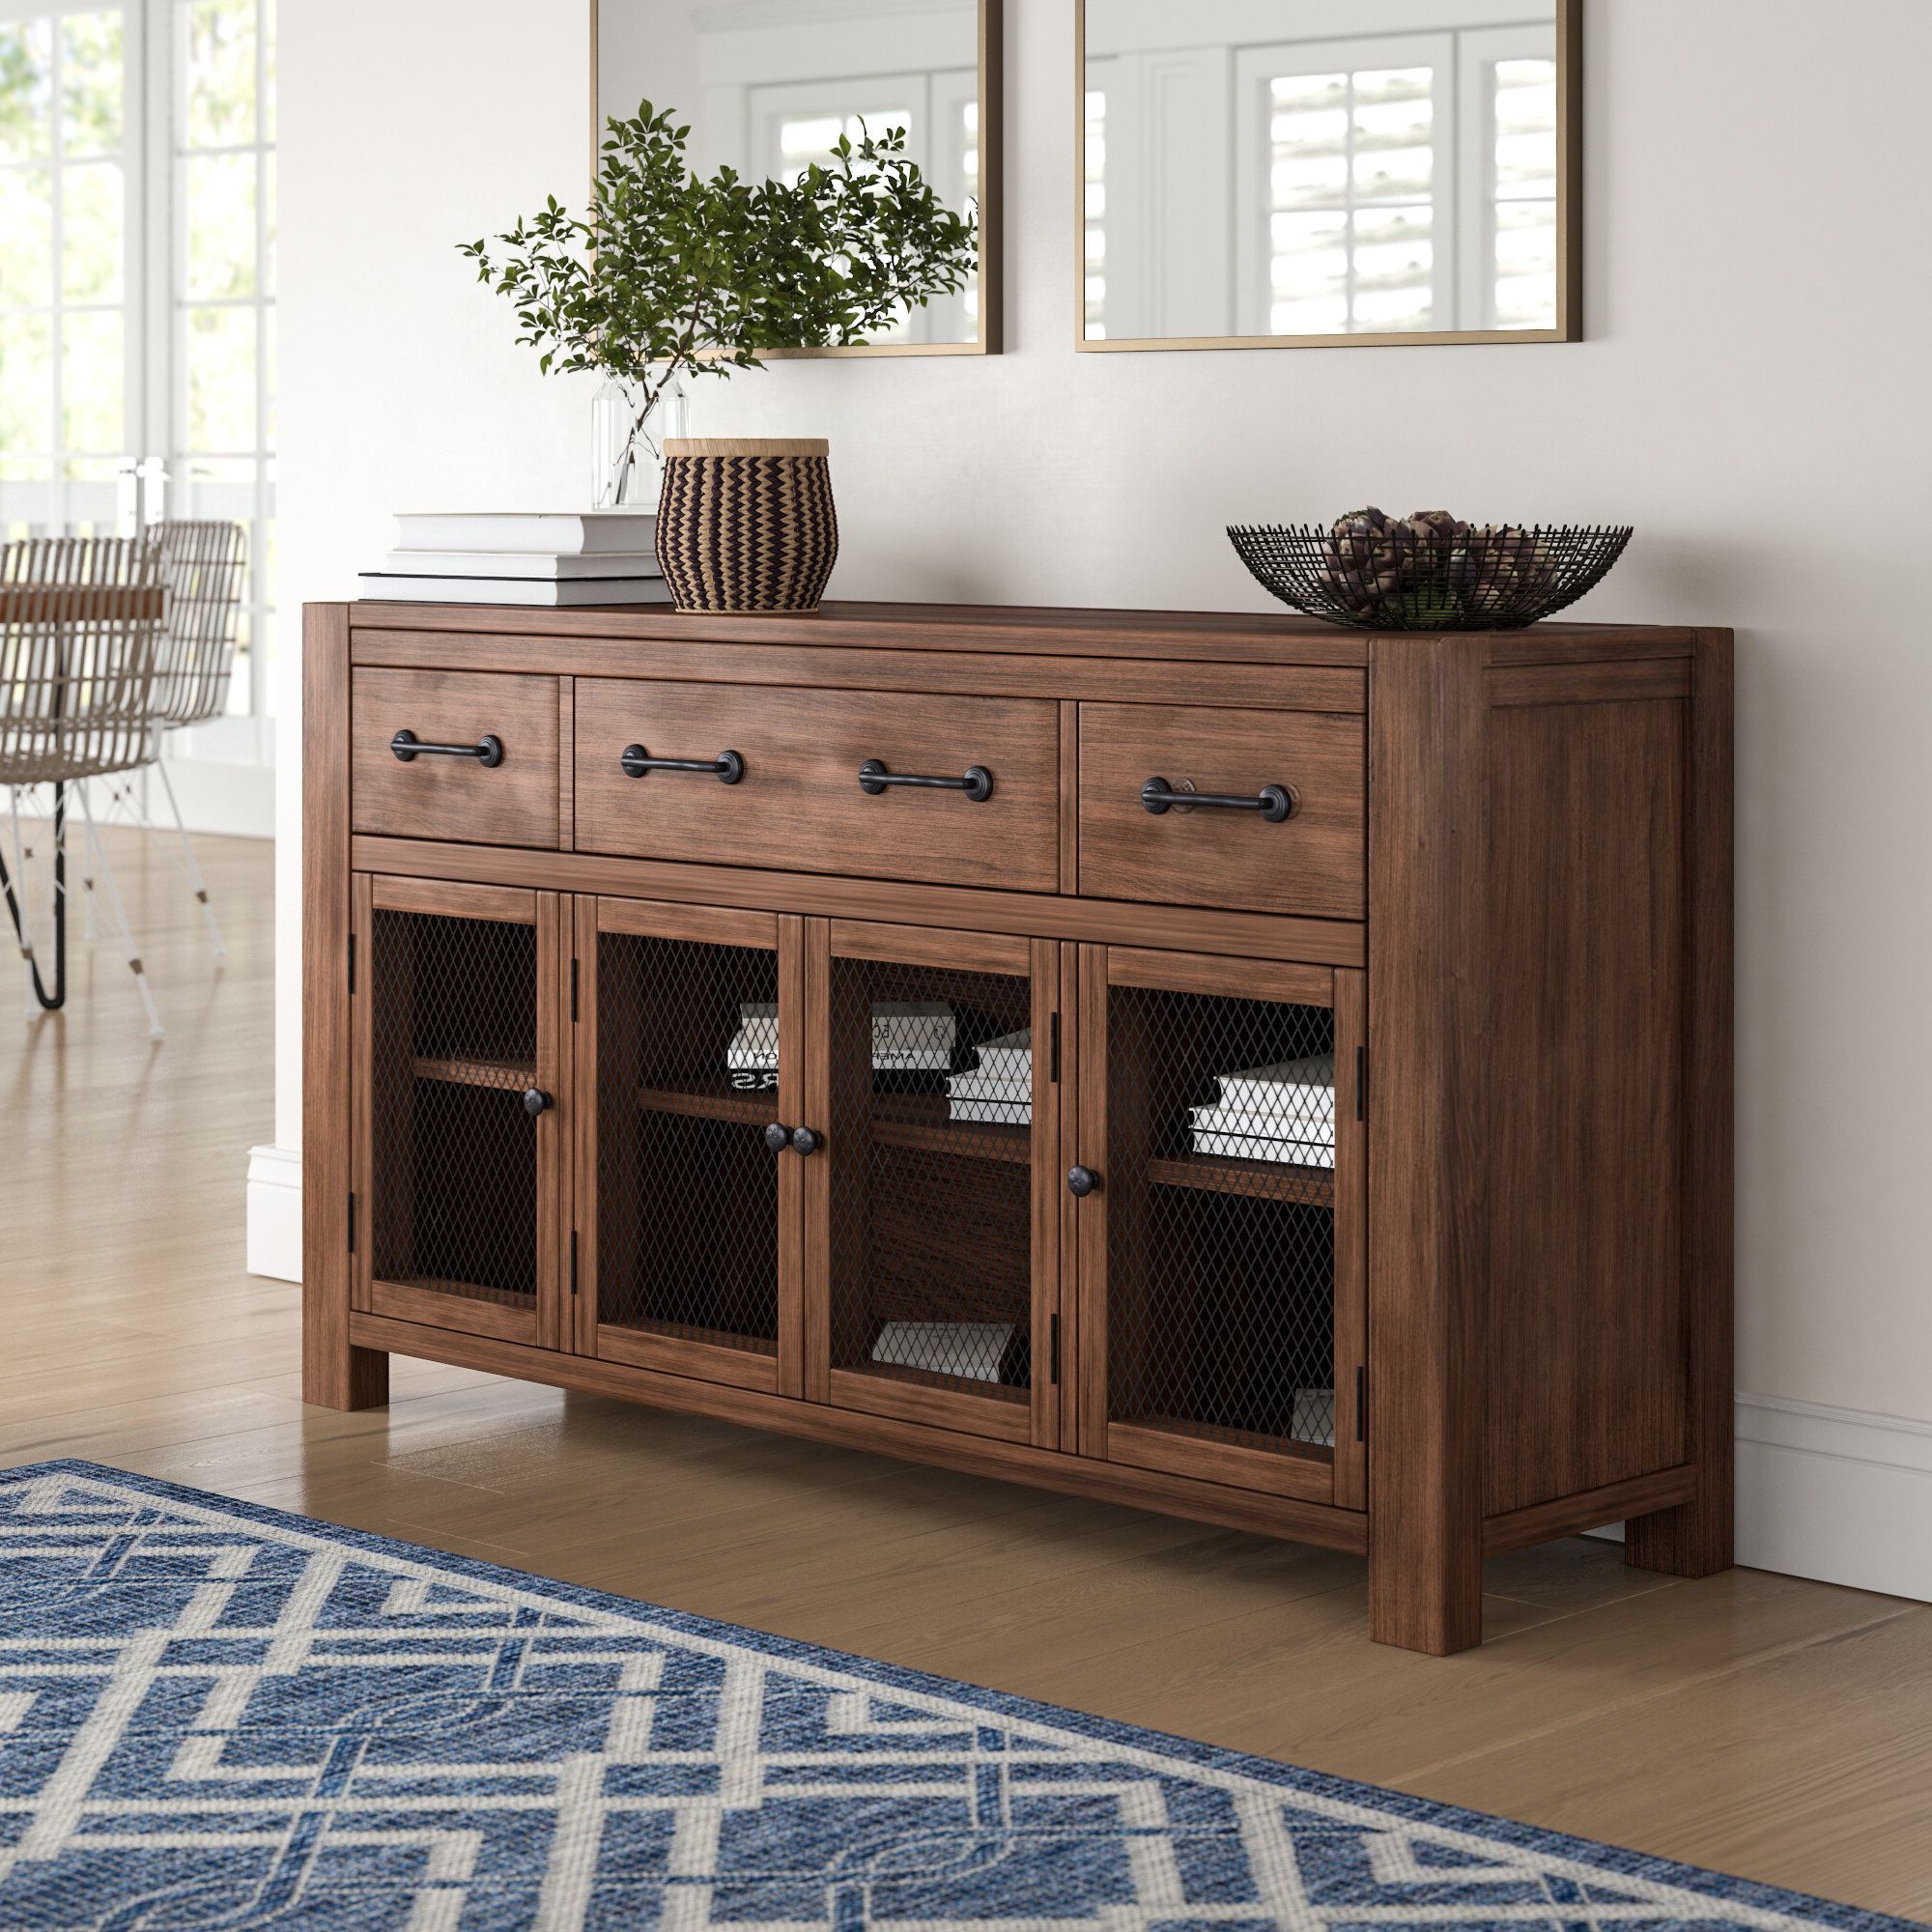 Transitional Buffet | Wayfair Pertaining To Saucedo Rustic White Buffets (Gallery 9 of 20)